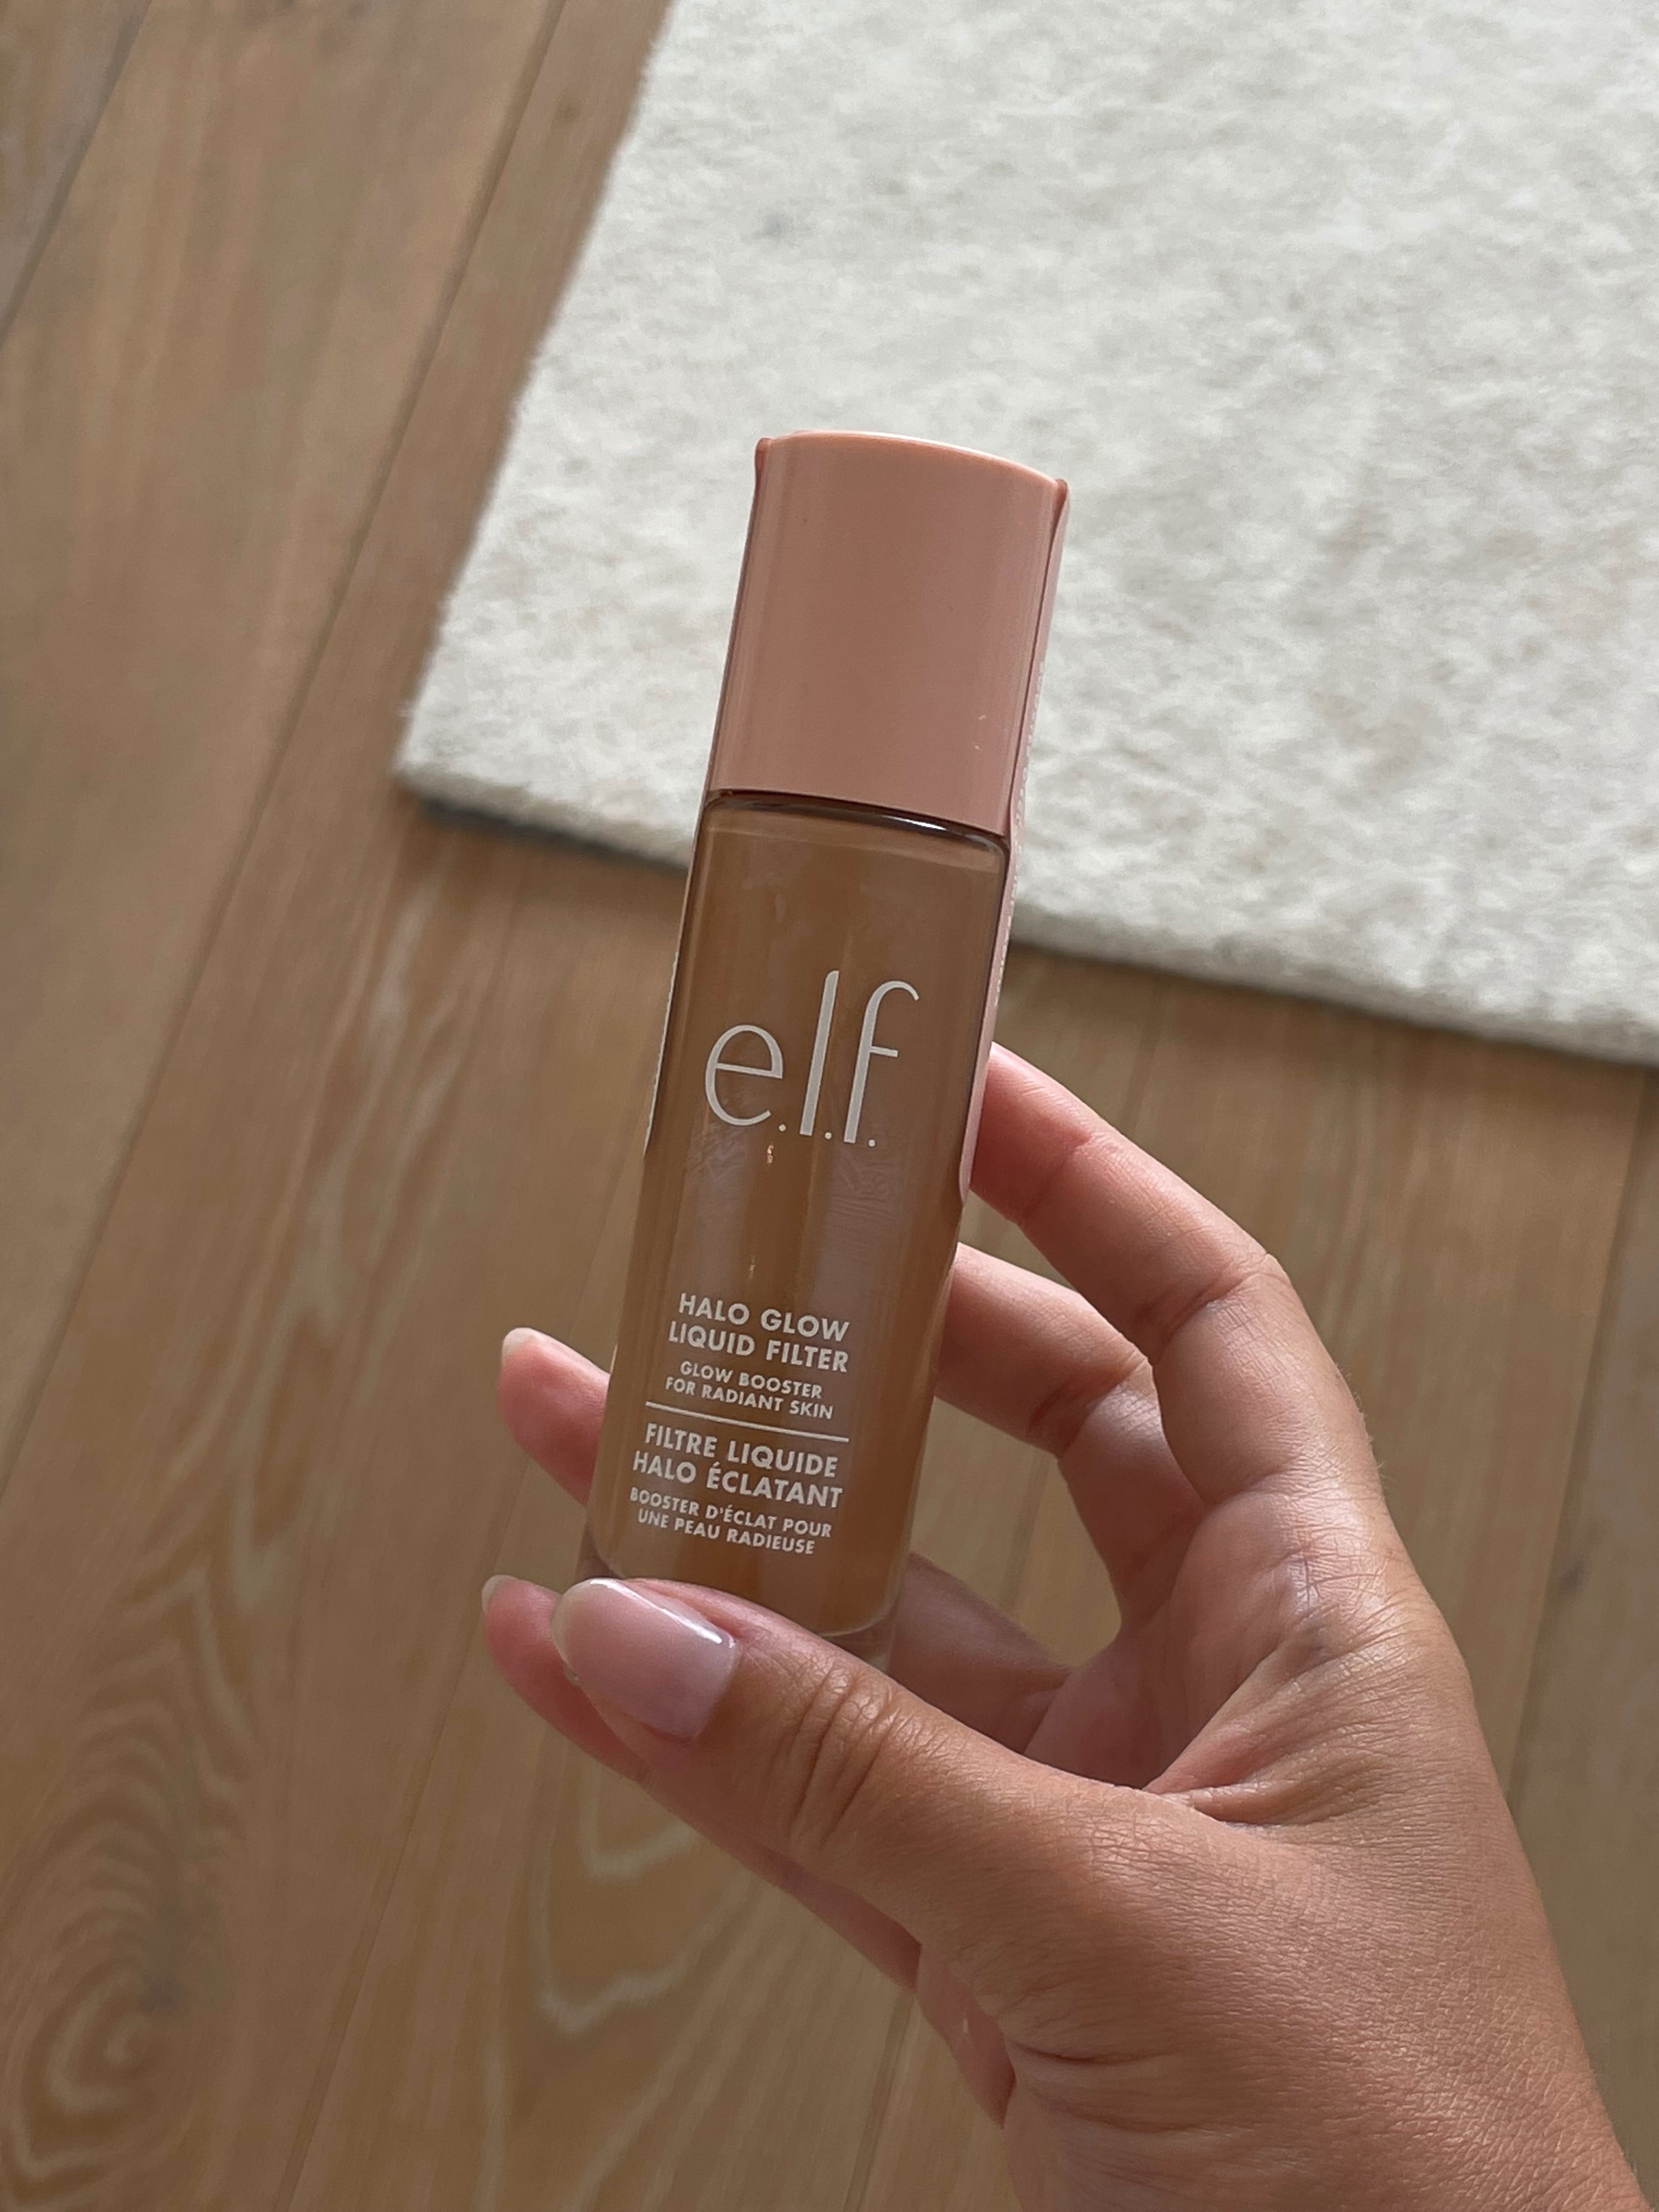 Tried Elf's Halo Glow Liquid Filter and I'm Obsessed! : r/MakeupAddiction